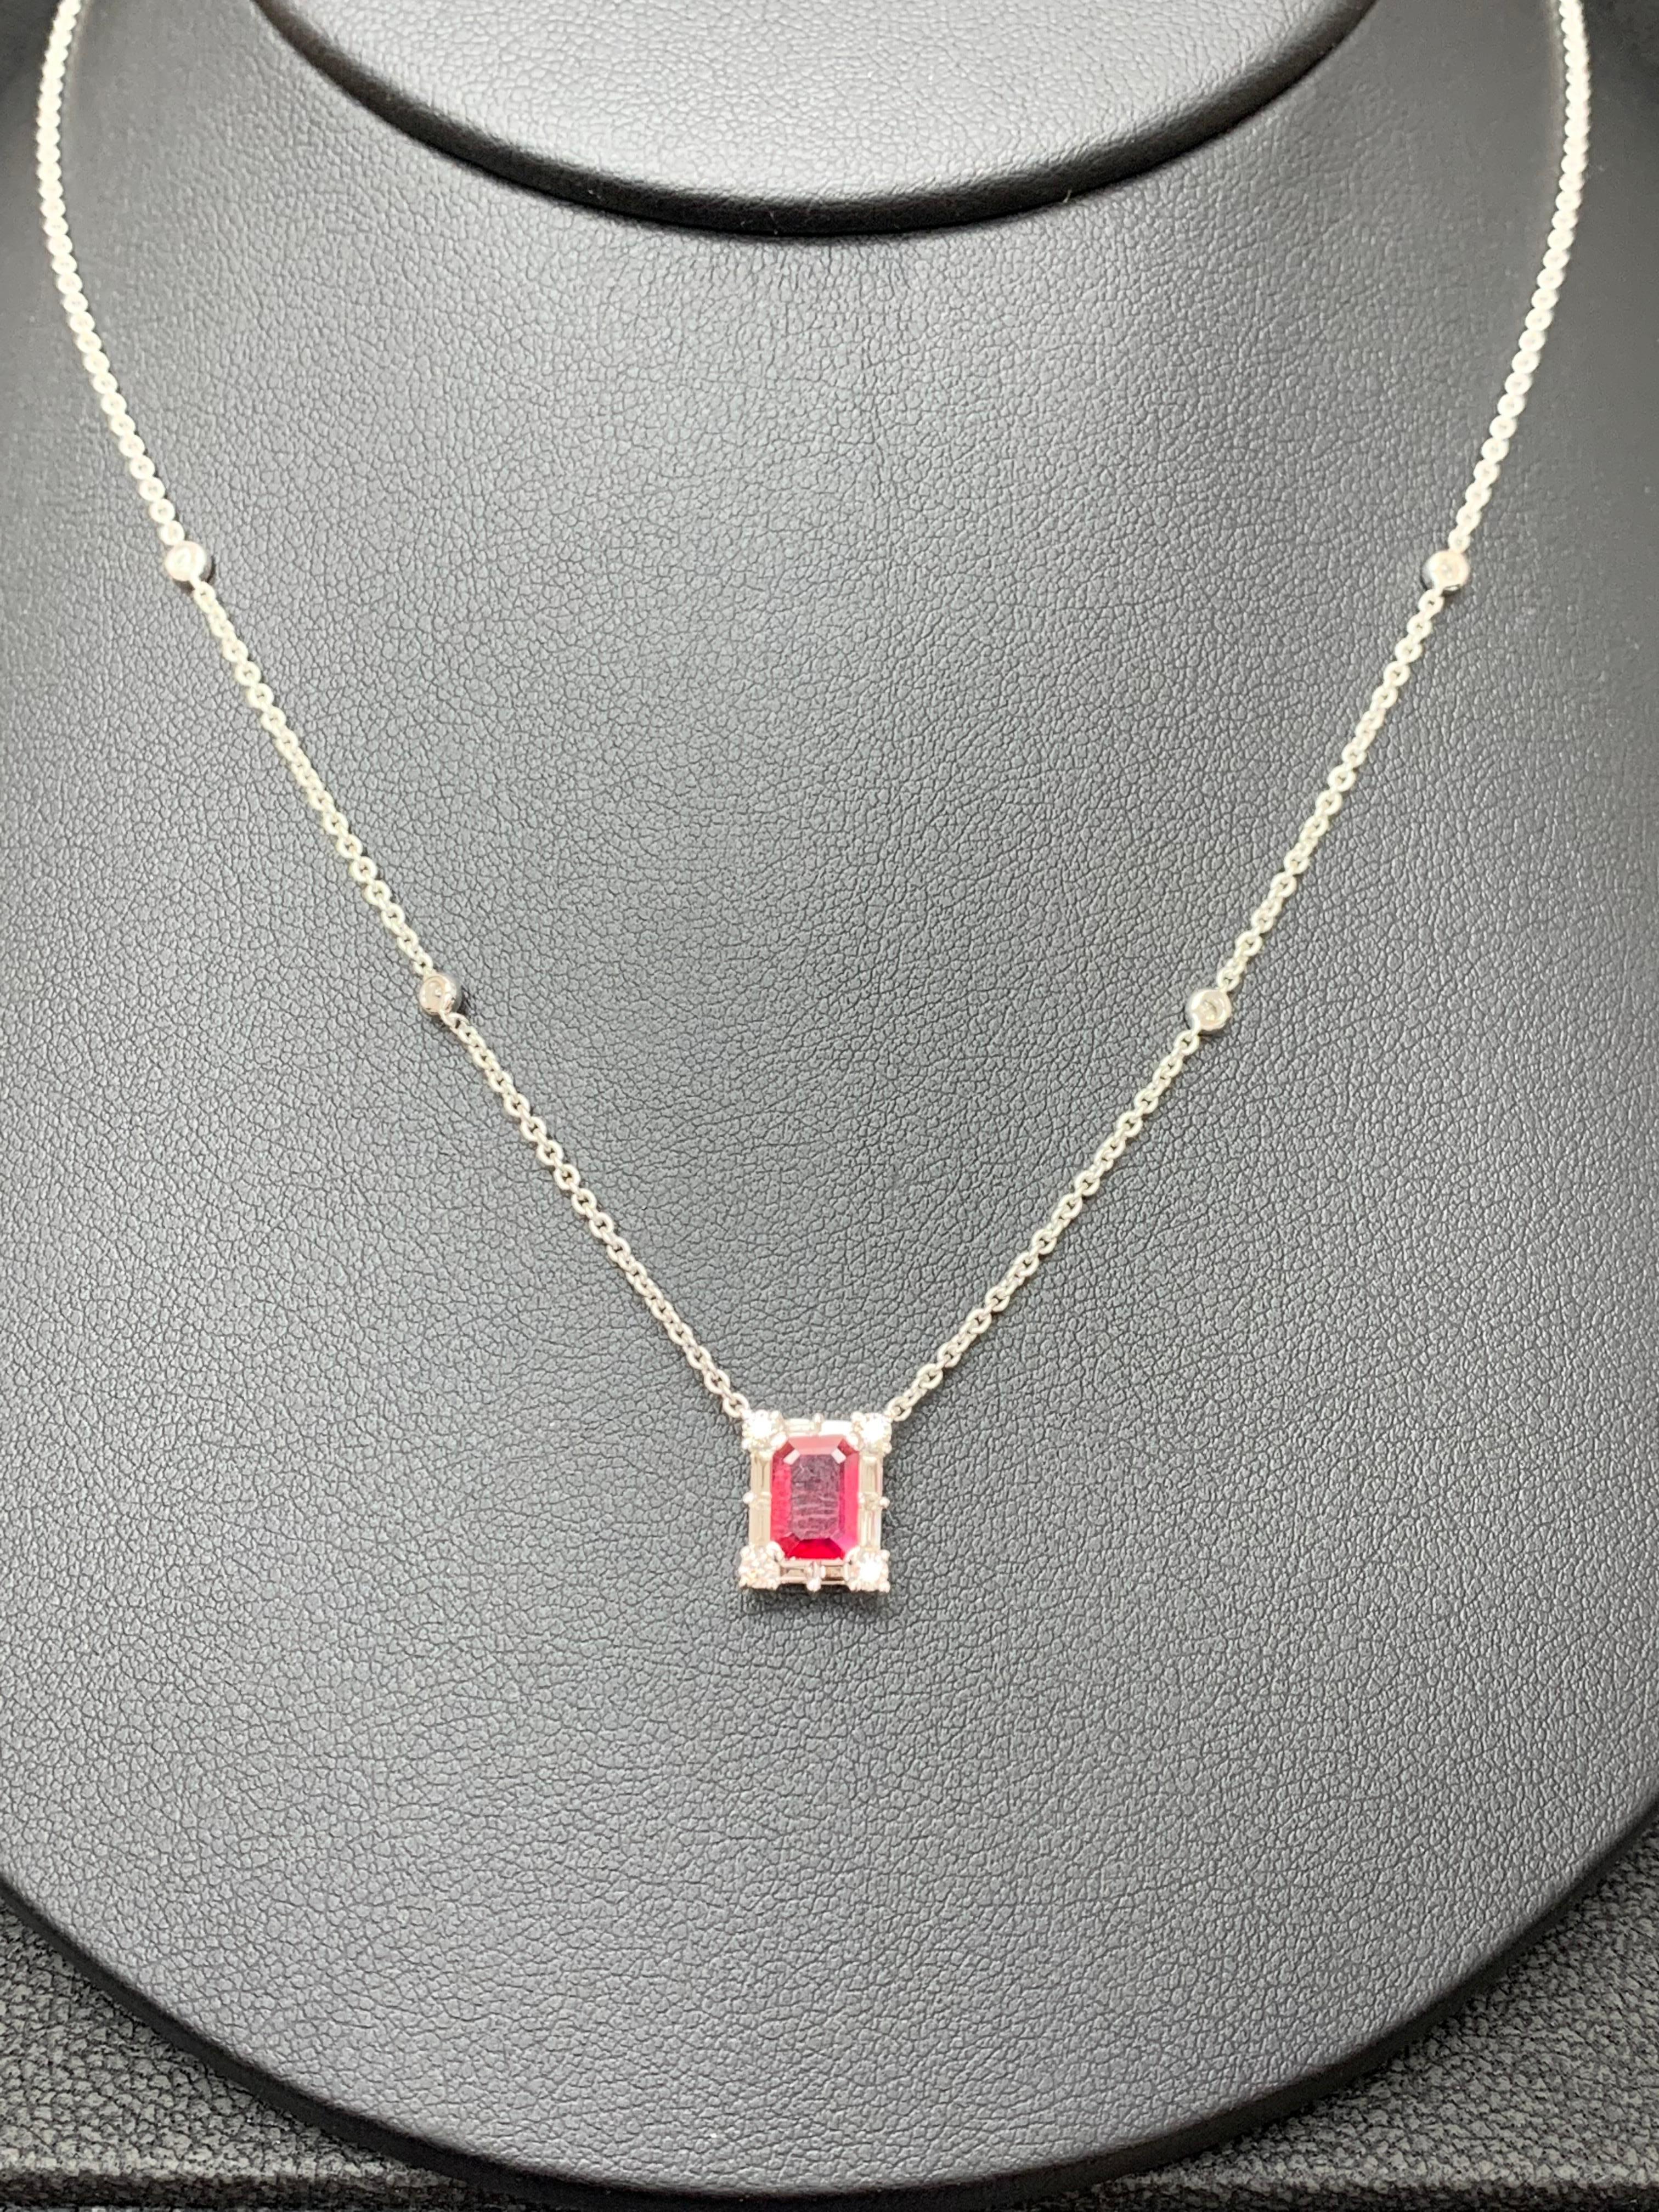 A fashionable pendant necklace showcasing a 0.77-carat emerald cut vibrant red color Ruby. The center stone is surrounded by a row of brilliant-cut 8 round and 8 baguette diamonds weighing 0.58 carats total. Made in 18k white gold. Comes with a gold